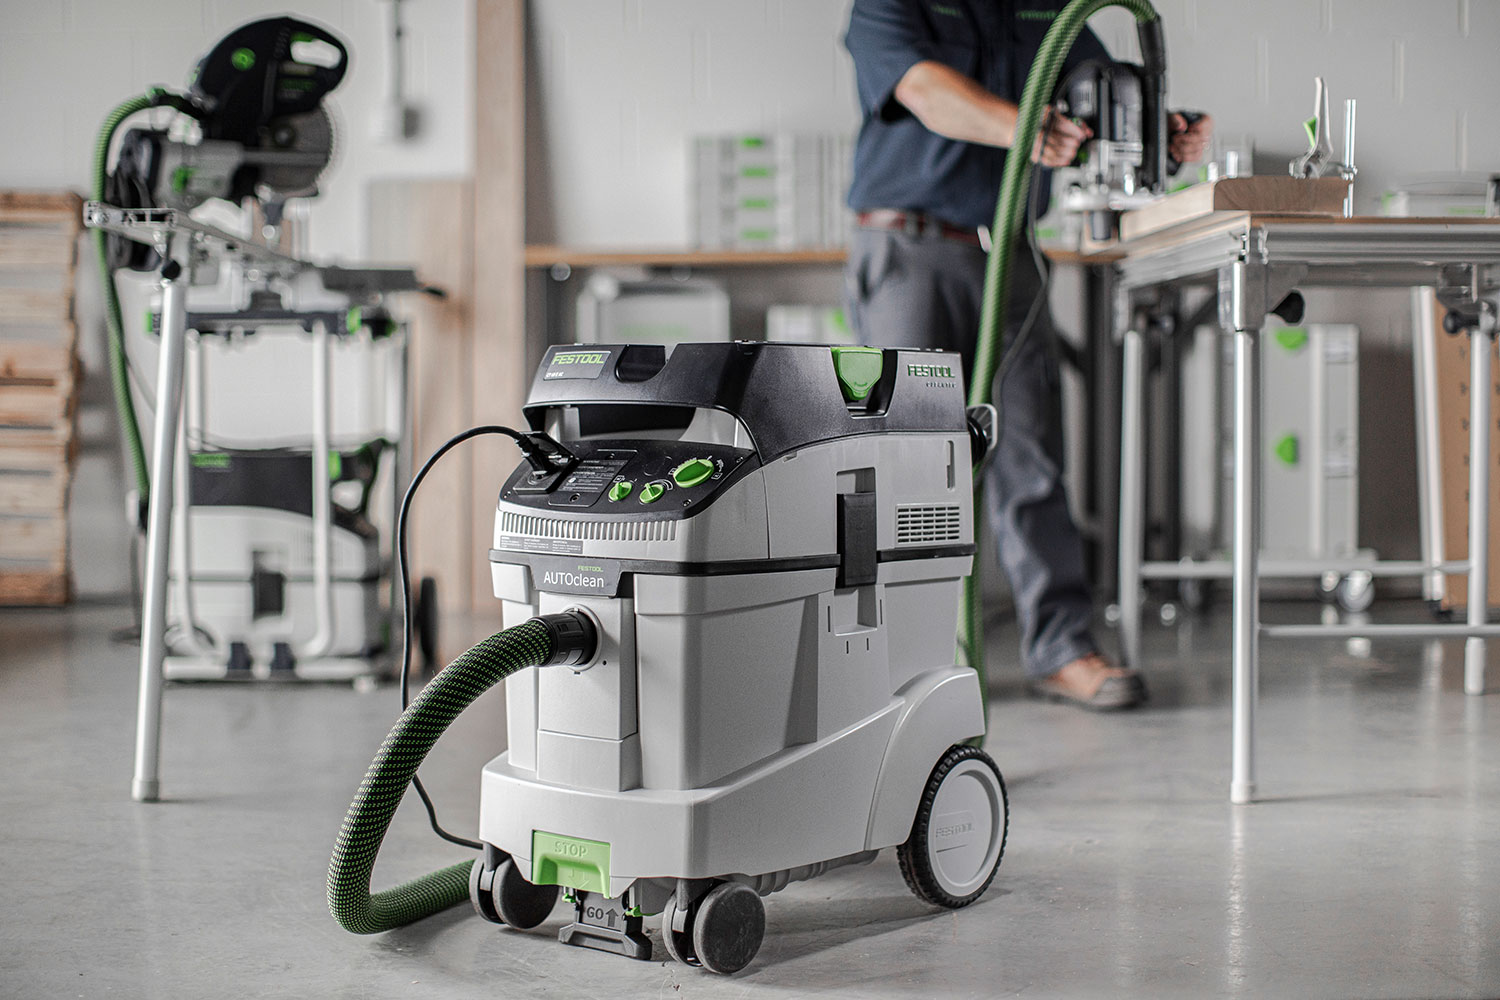 Using a Festool extractor with a range of power tools.